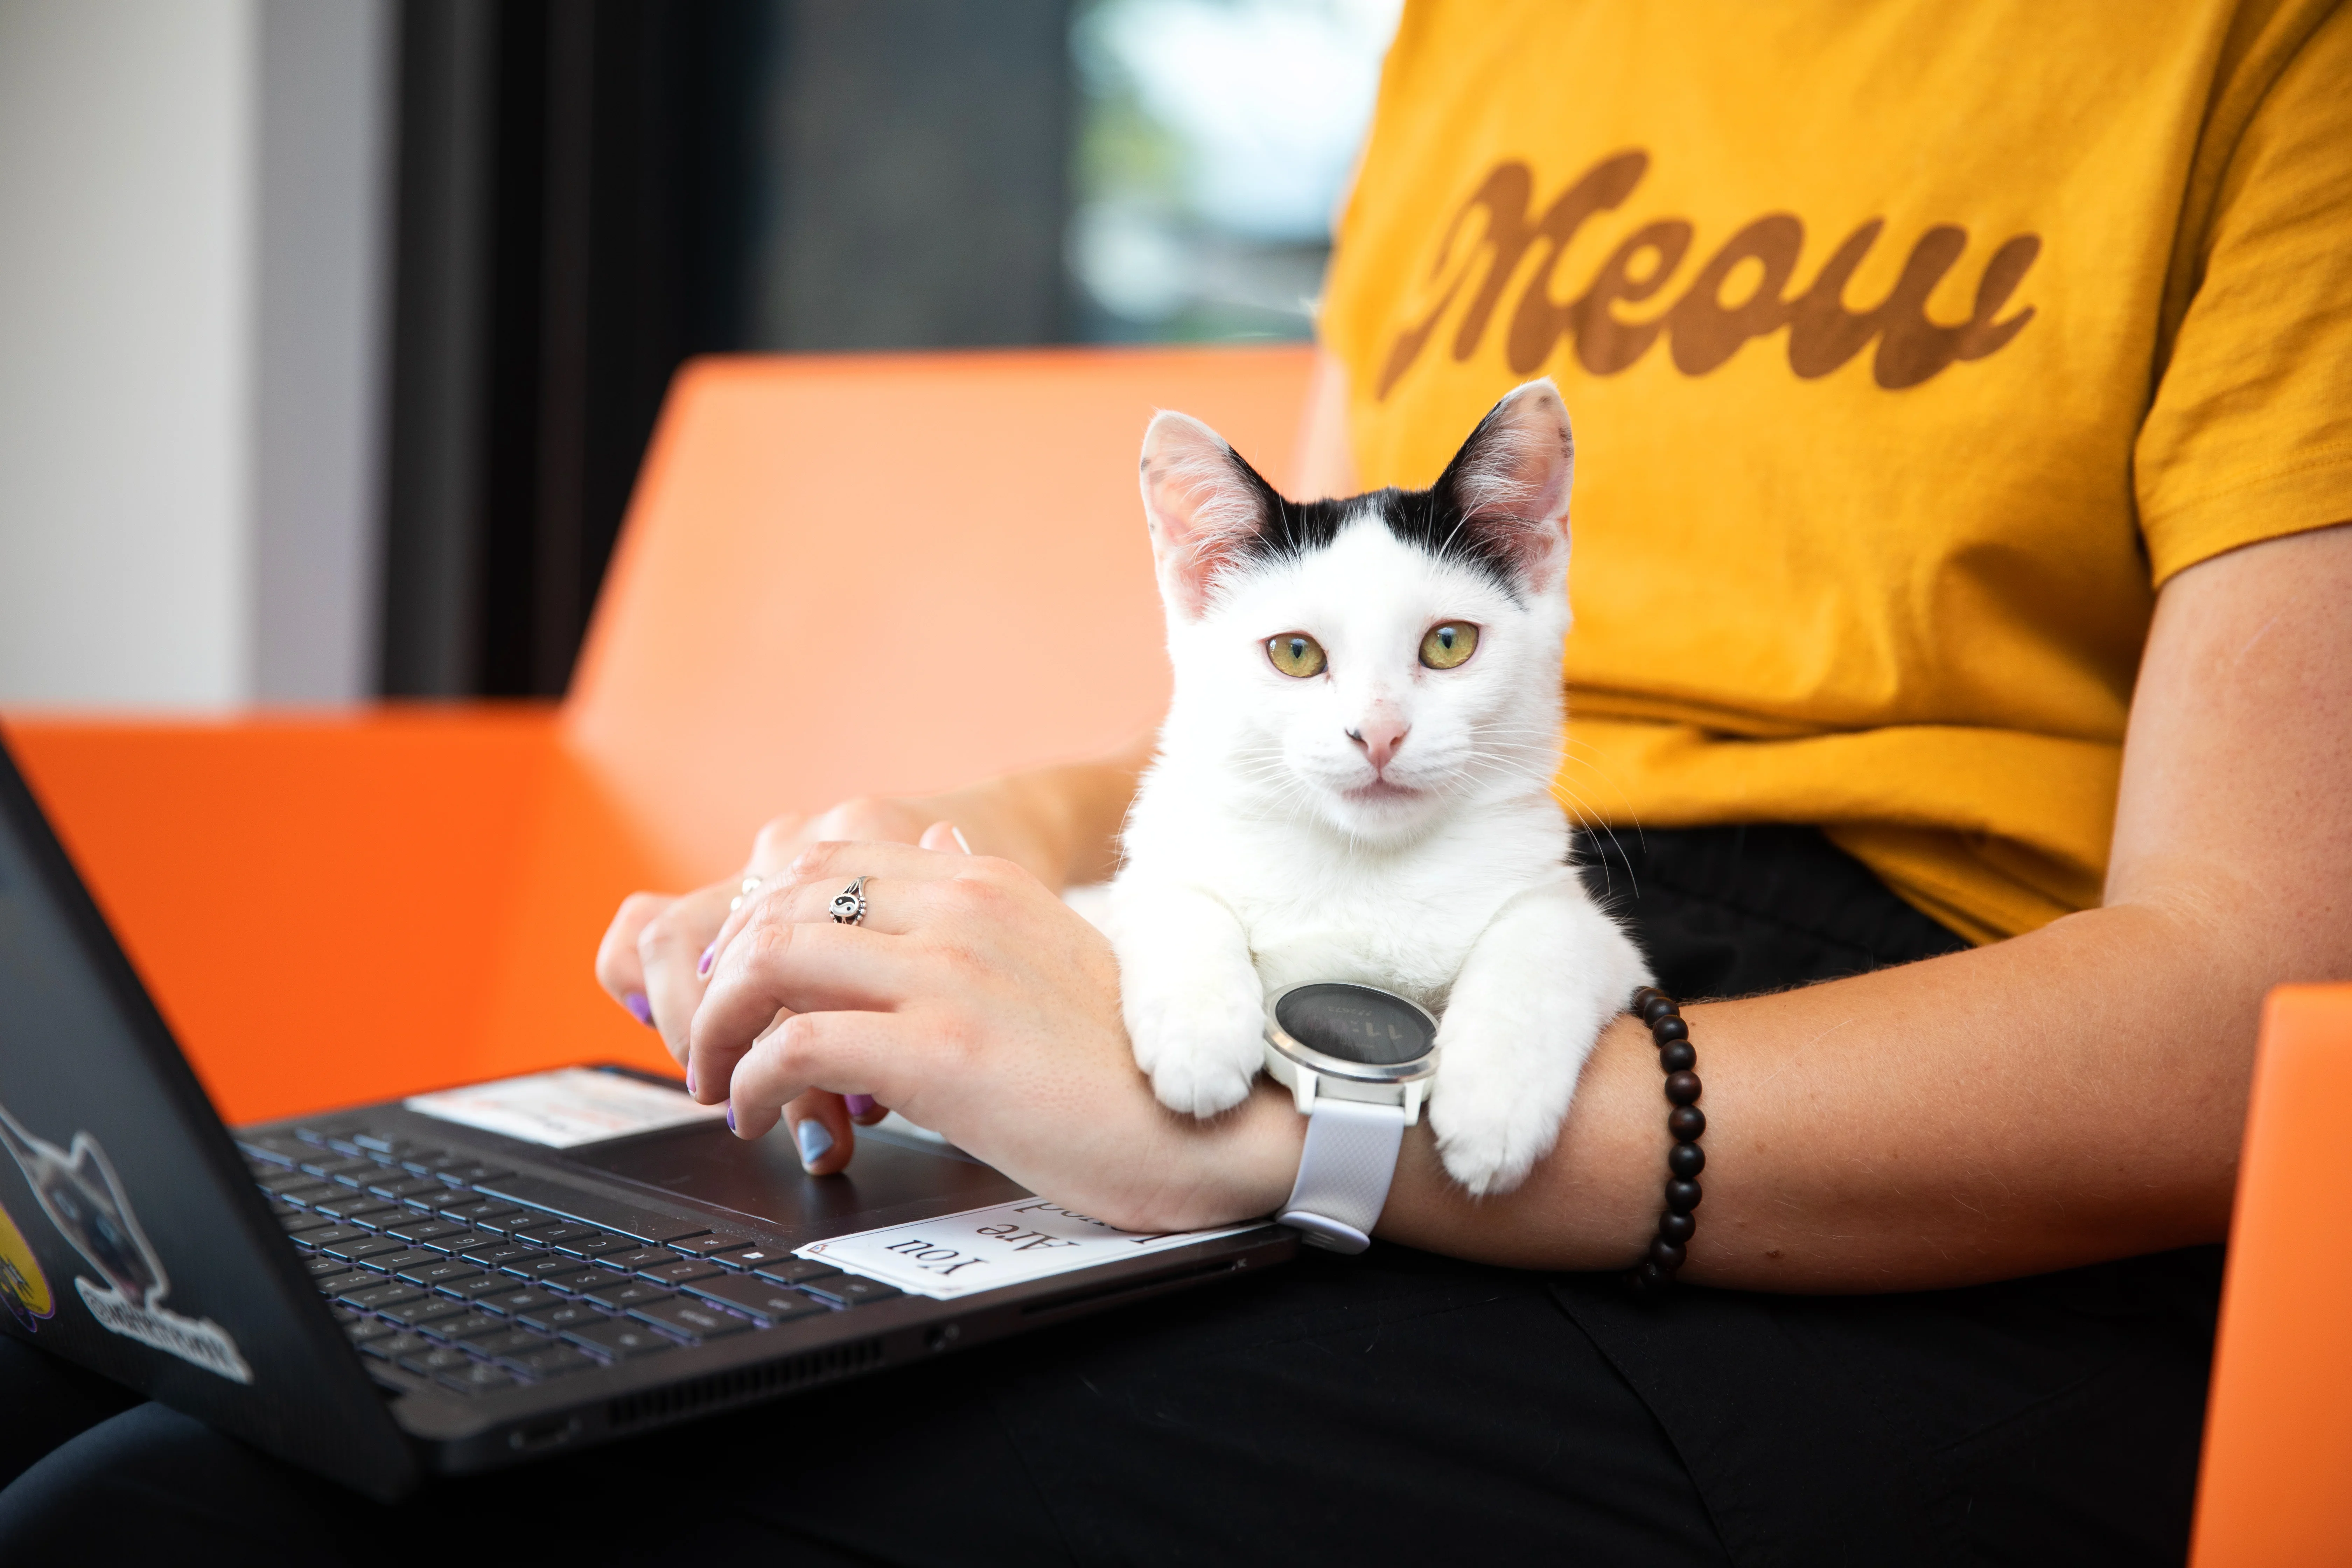 Kitten sitting on a person's lap as they work on a laptop